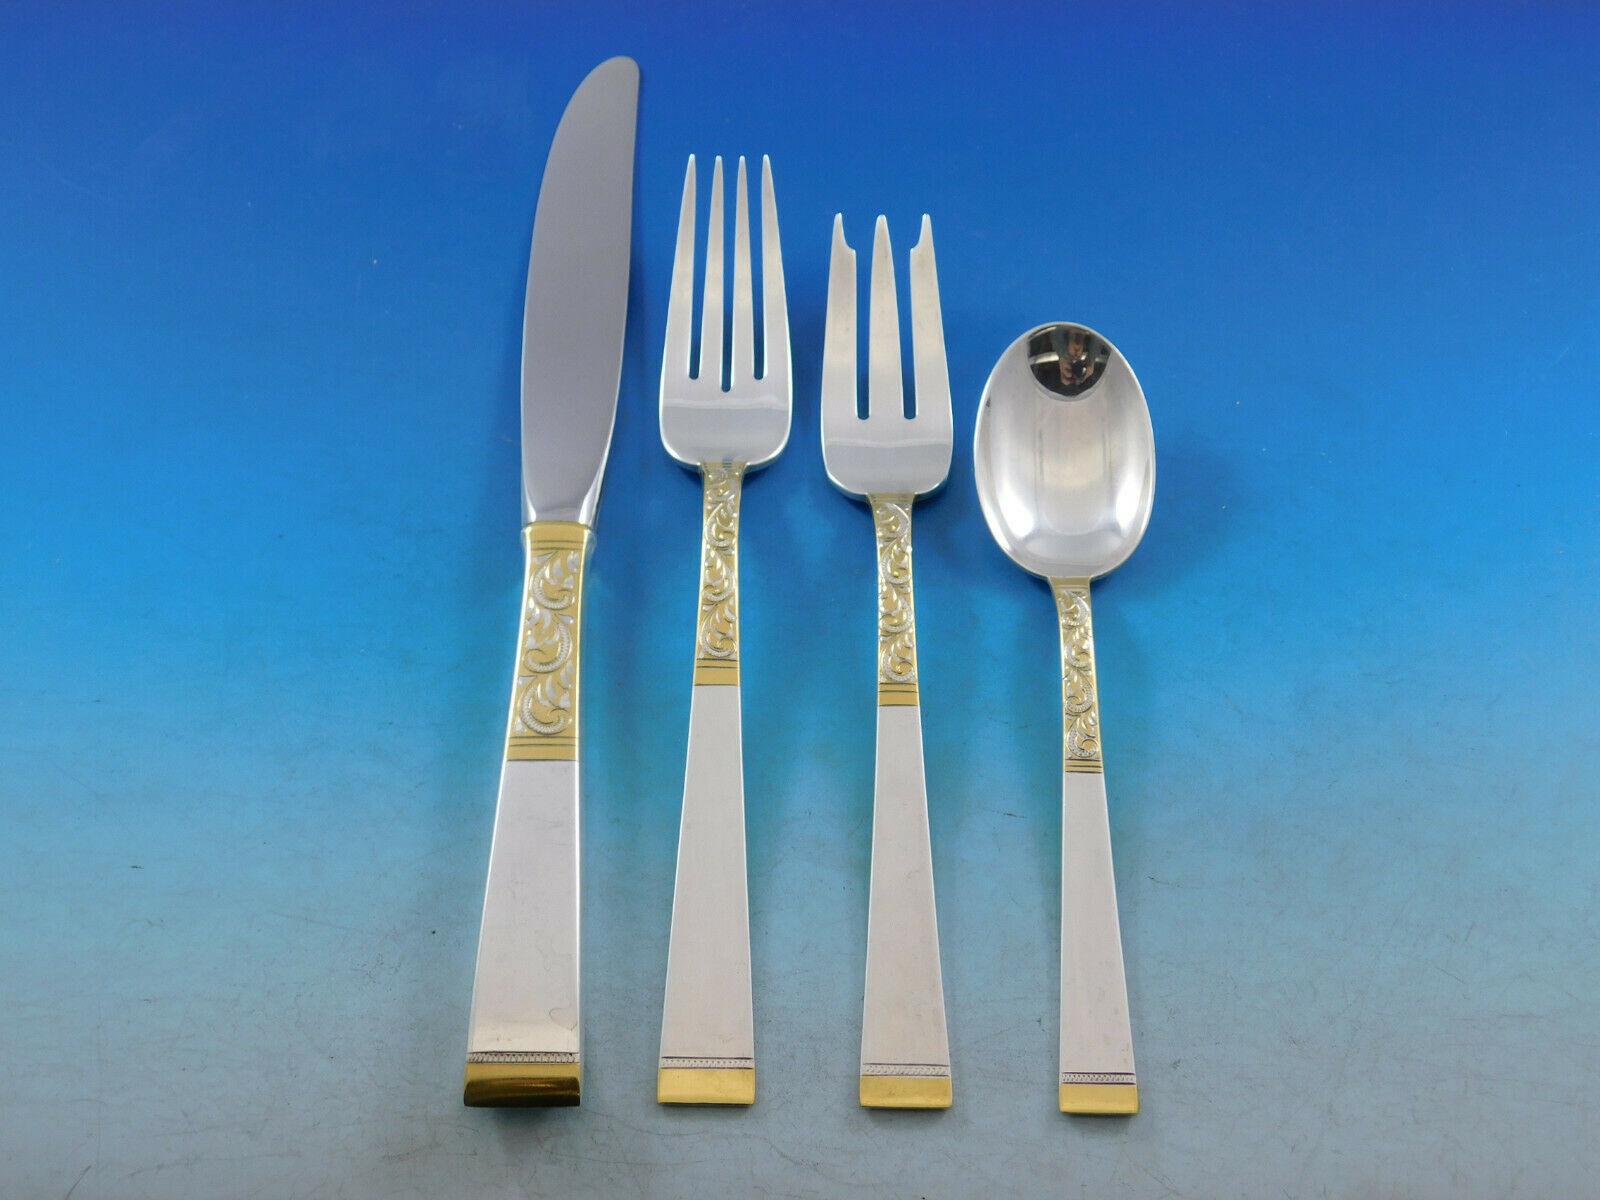 Lovely bright-cut golden scroll by Gorham sterling silver Flatware set, 66 pieces. This set includes:

12 Knives, 9 1/8